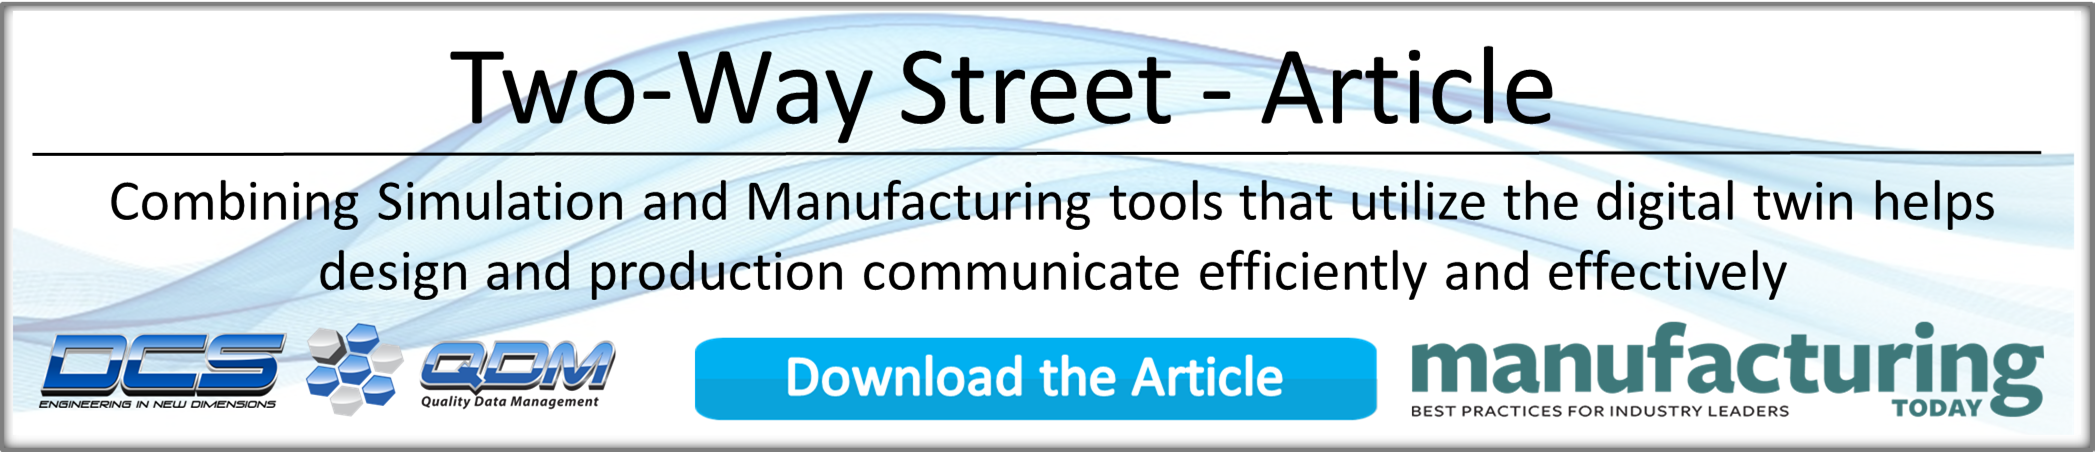 Two-Way Street Manufacturing Today Article